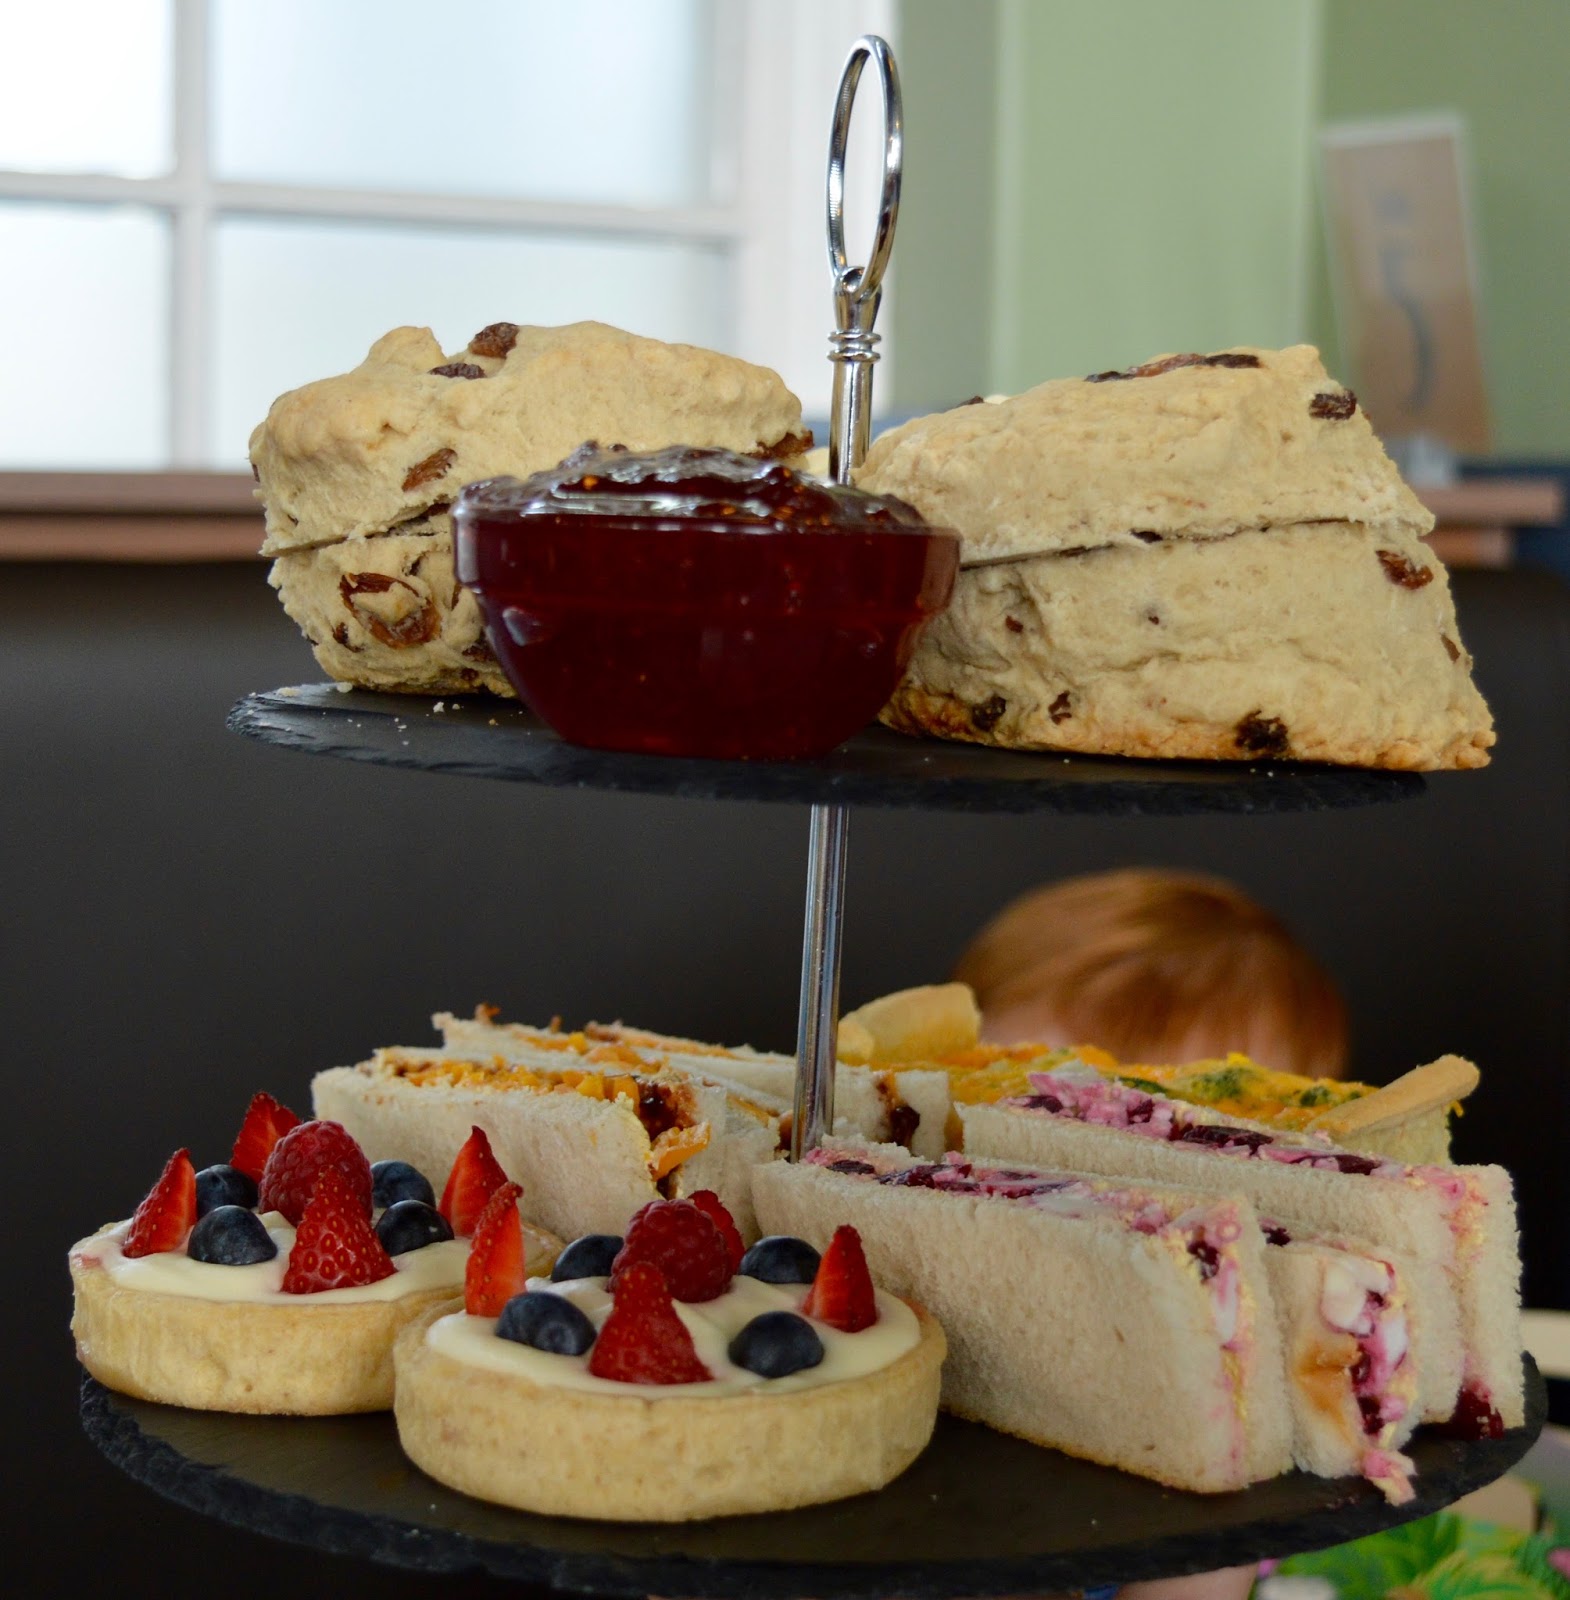 Cafe 32 | Linskill Centre, North Shields - A review - homemade afternoon tea